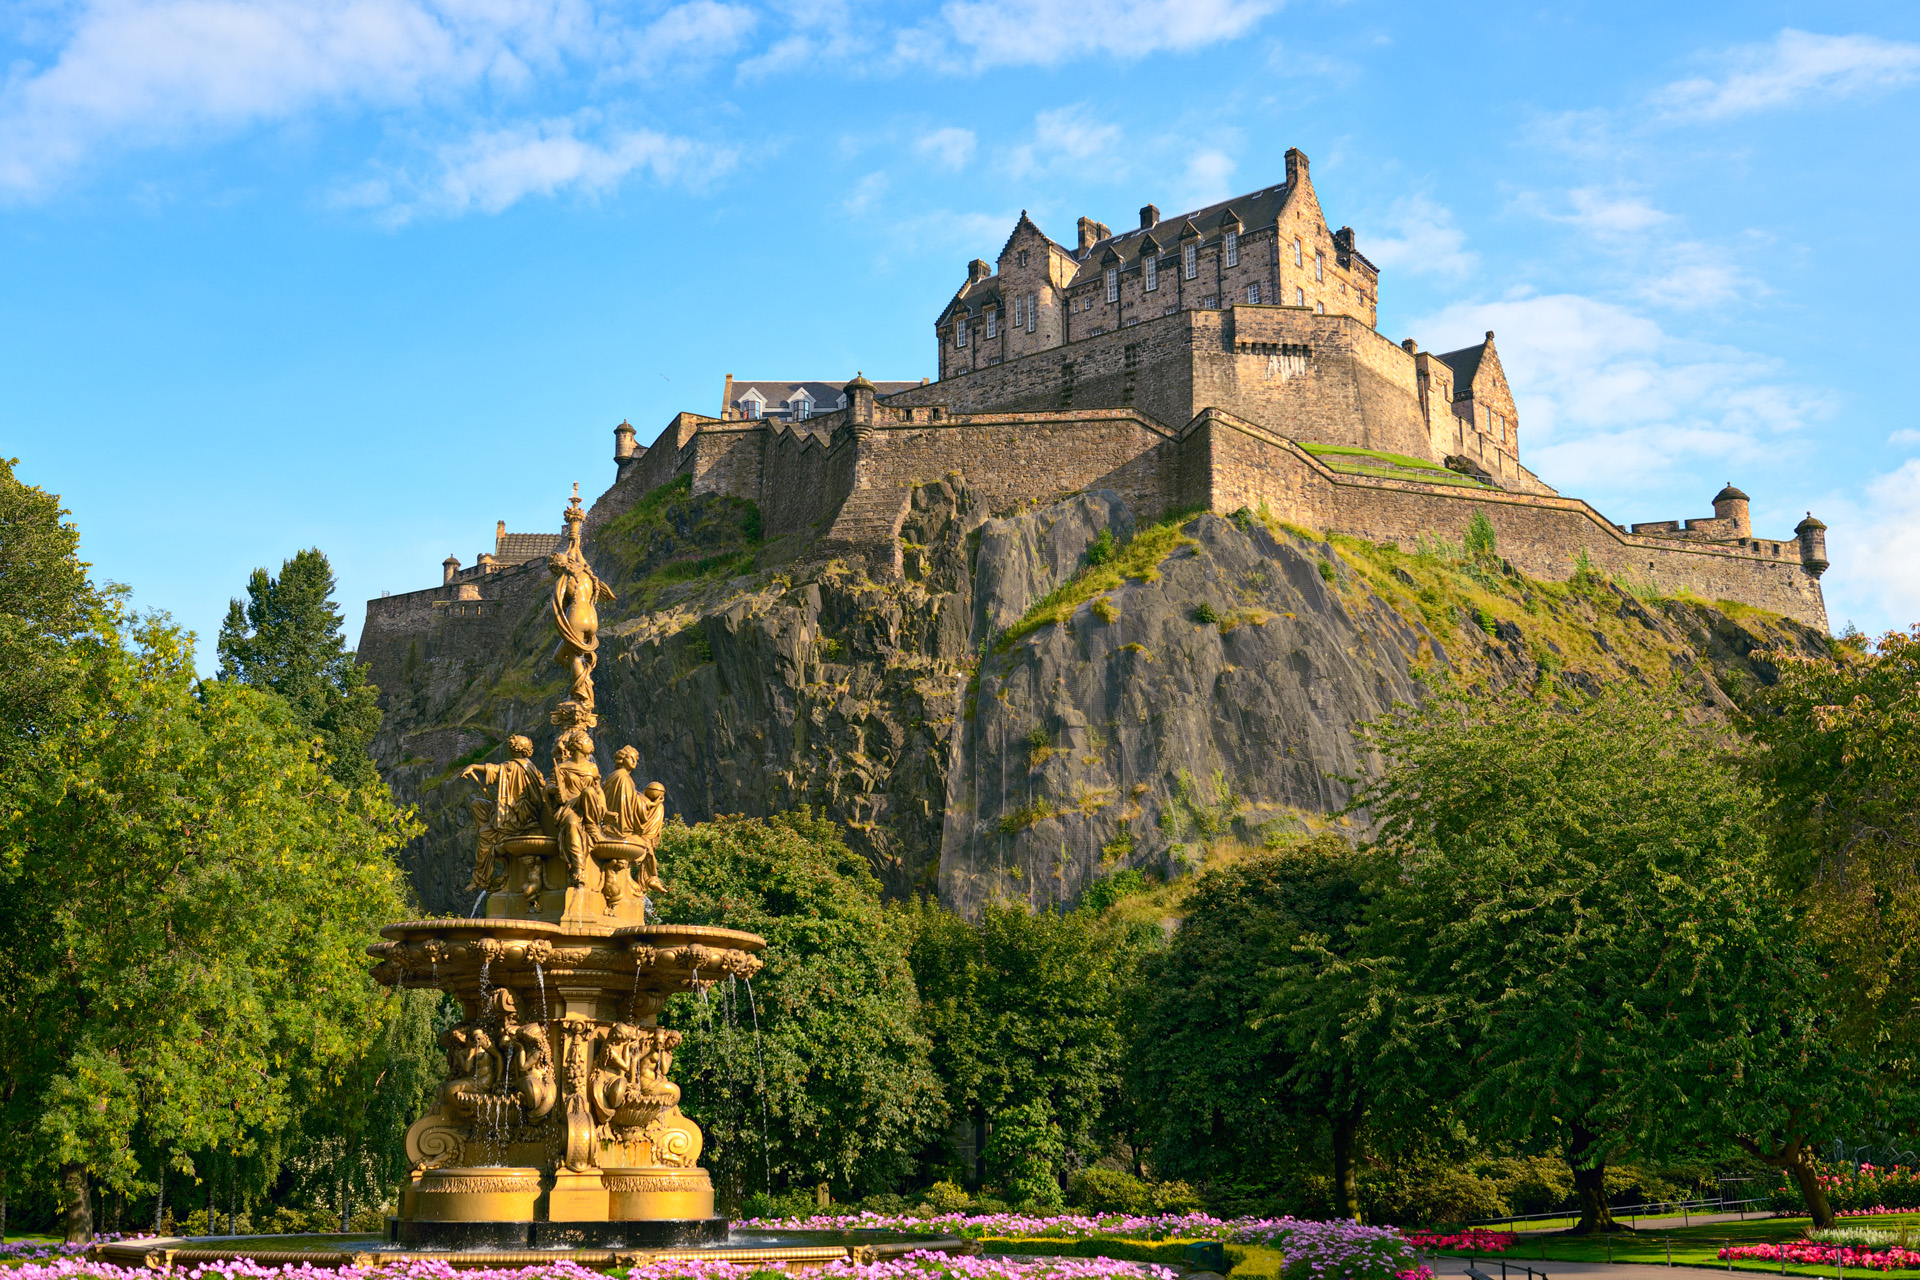 Edinburgh Castle, Scotland, from Princes Street Gardens, with the Ross Fountain in the foreground